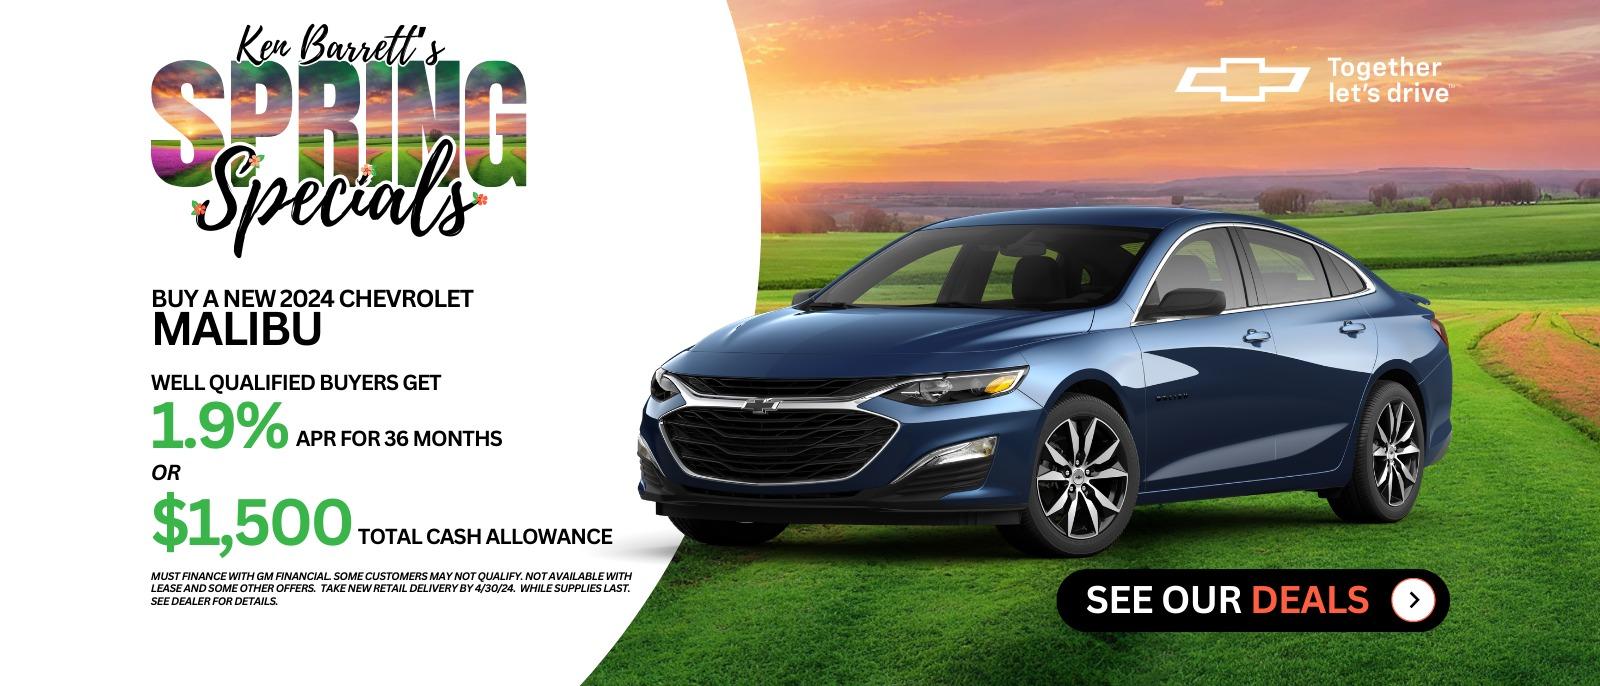 Ken Barrett's Spring Specials new deals on new Chevrolets in Batavia NY.  Find the Chevy deal for you.  Check out the new car deal on this brand new Chevrolet Malibu